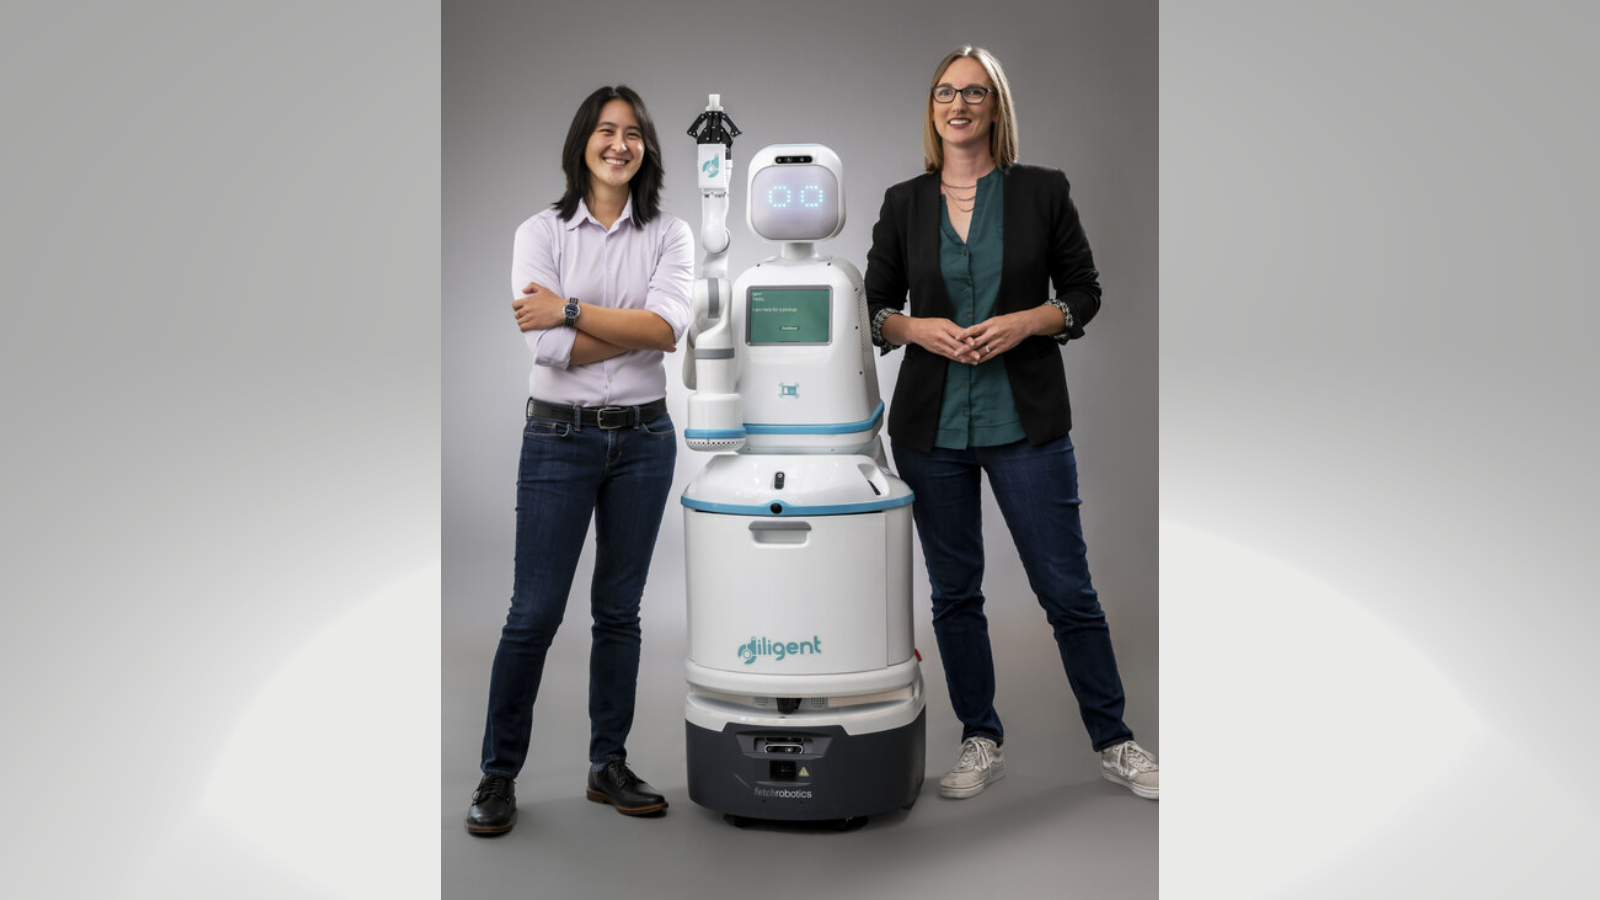 Dr. Andrea Thomaz and Dr. Vivian Chu from Diligent Robotics stand with Moxi.